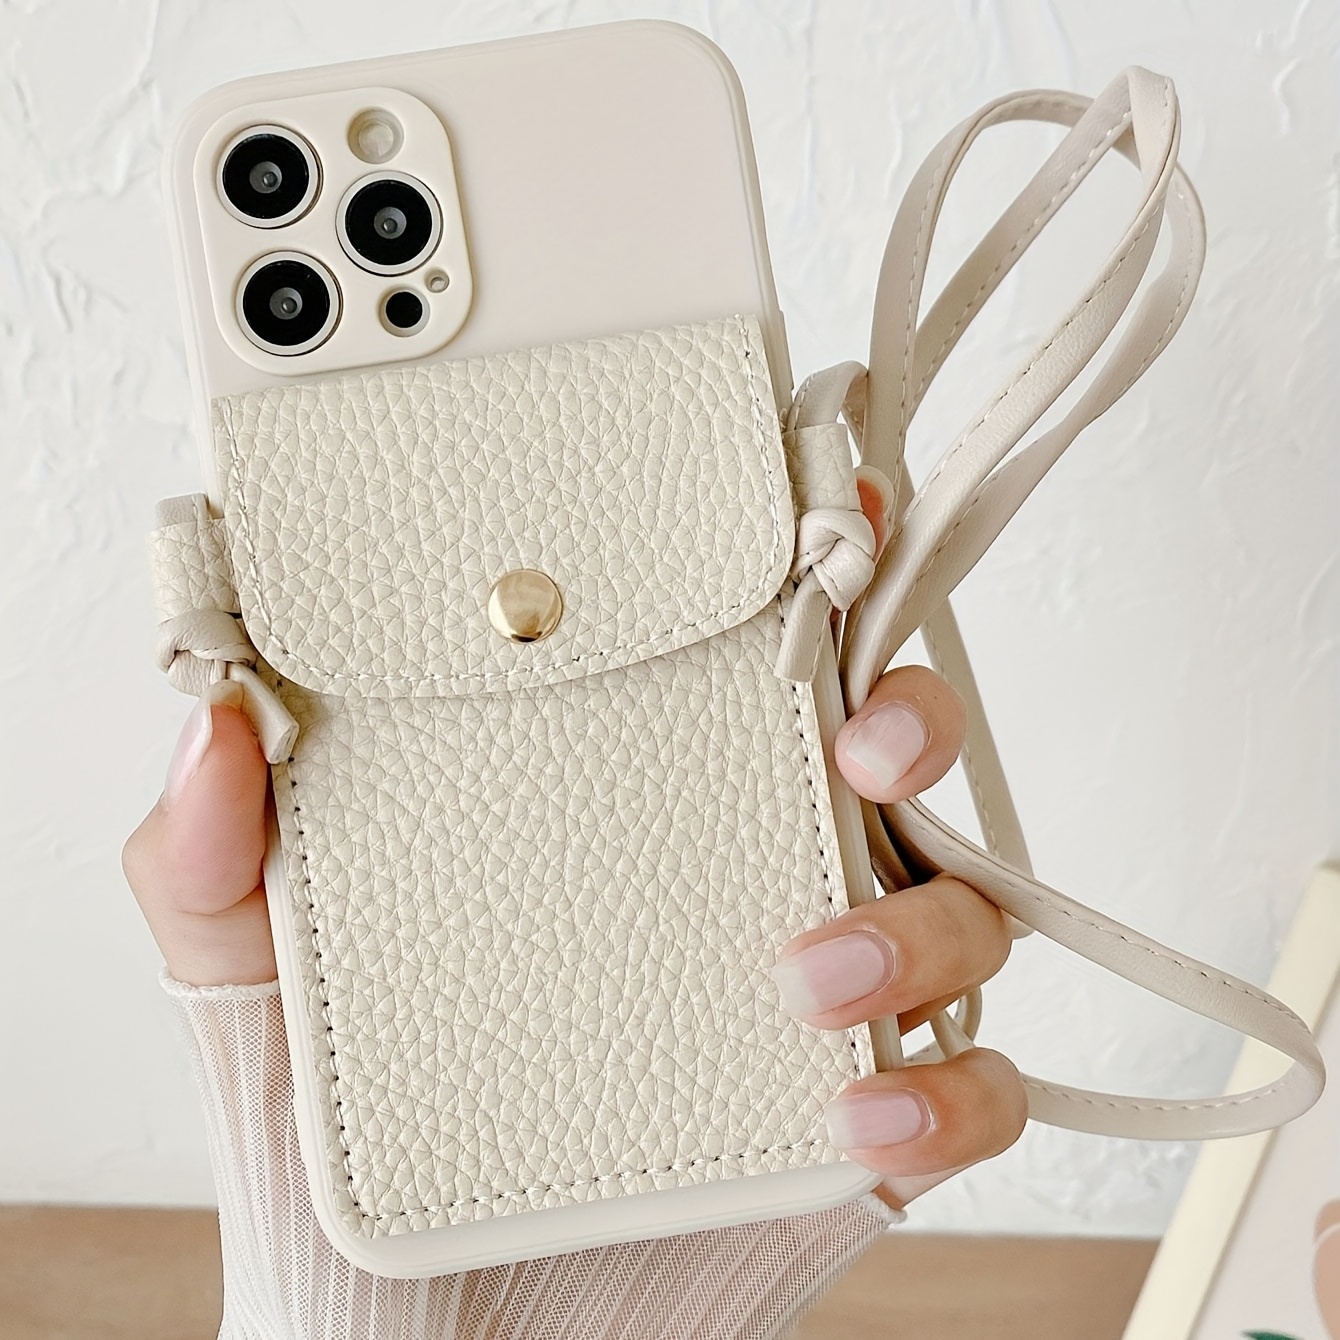 Fashionable Card Wallet iPhone Case